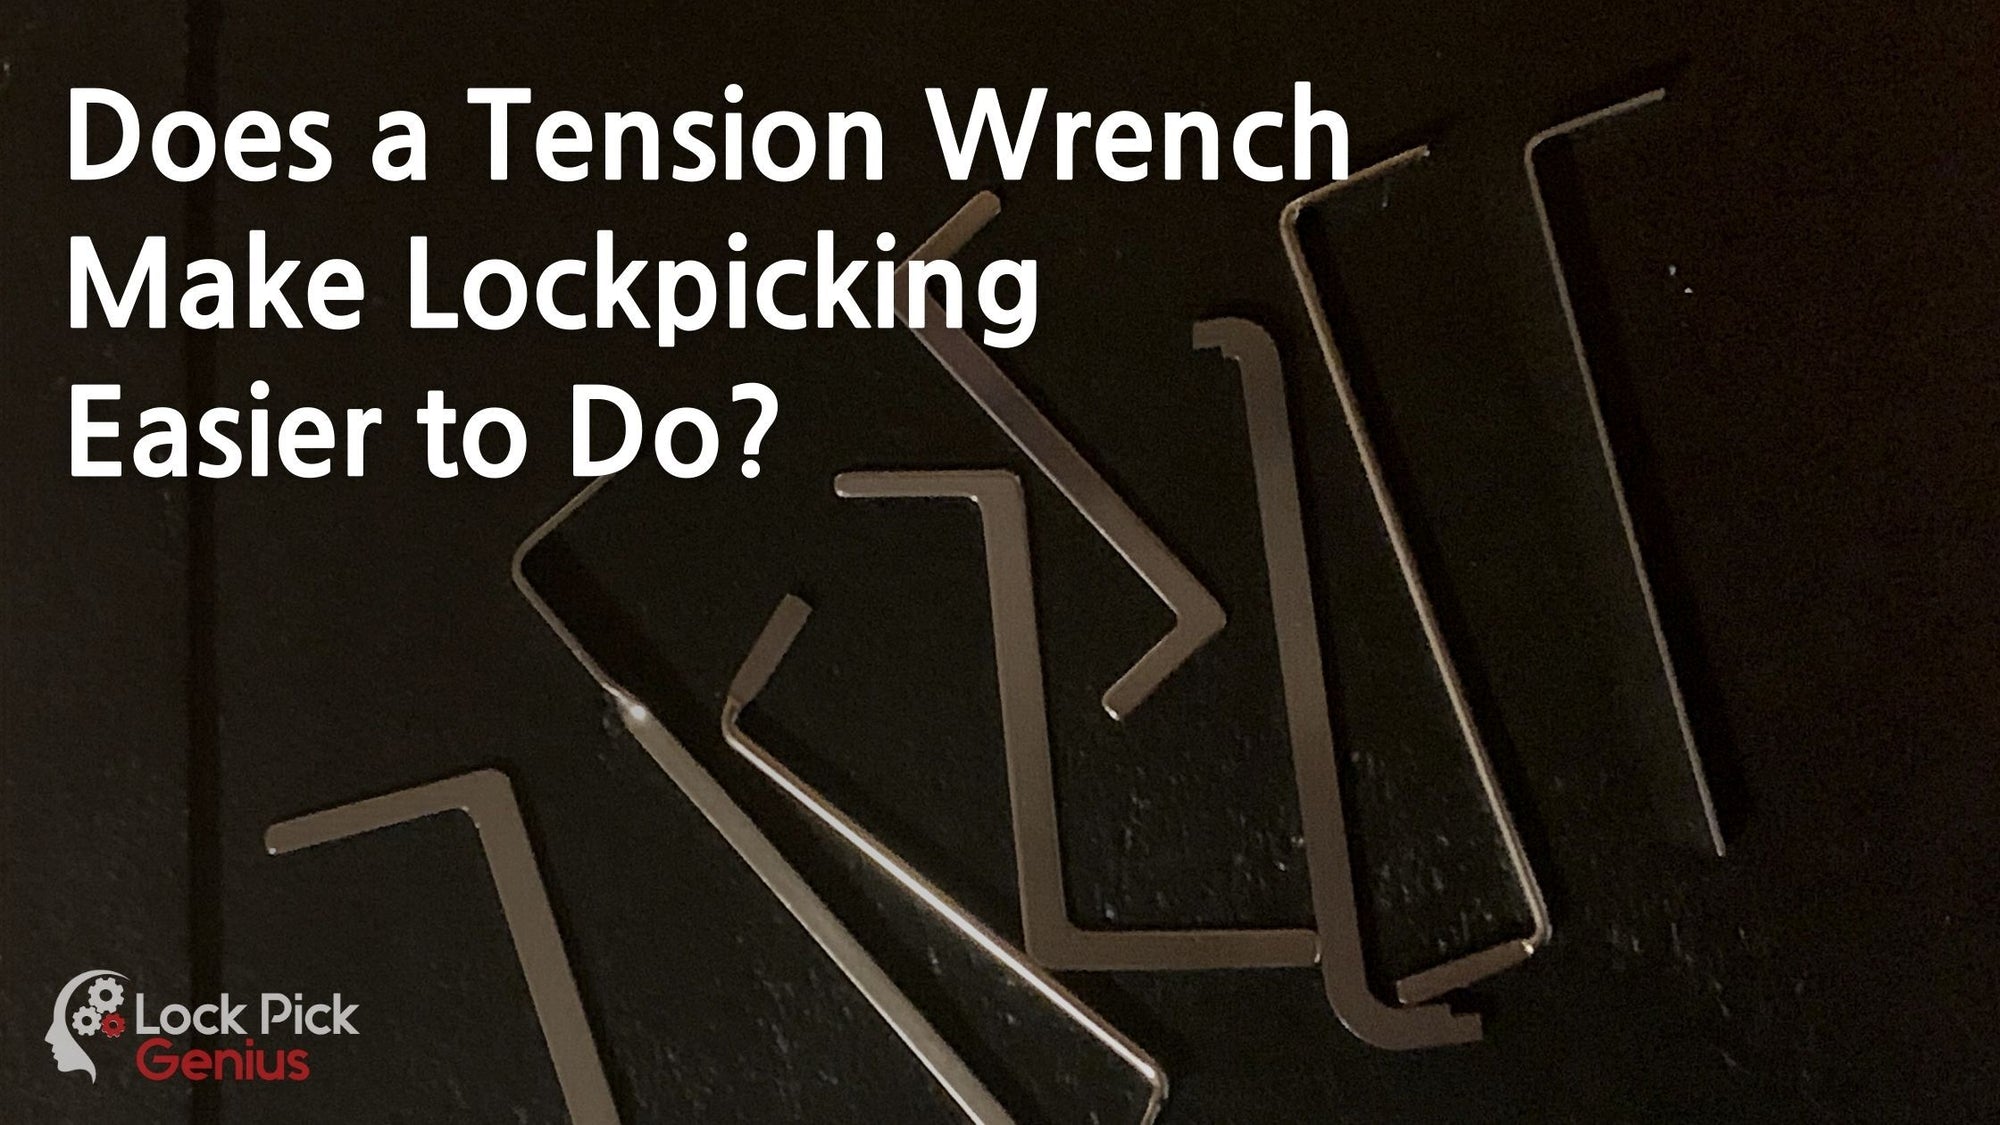 Does a Tension Wrench Make Lockpicking Easier to Do